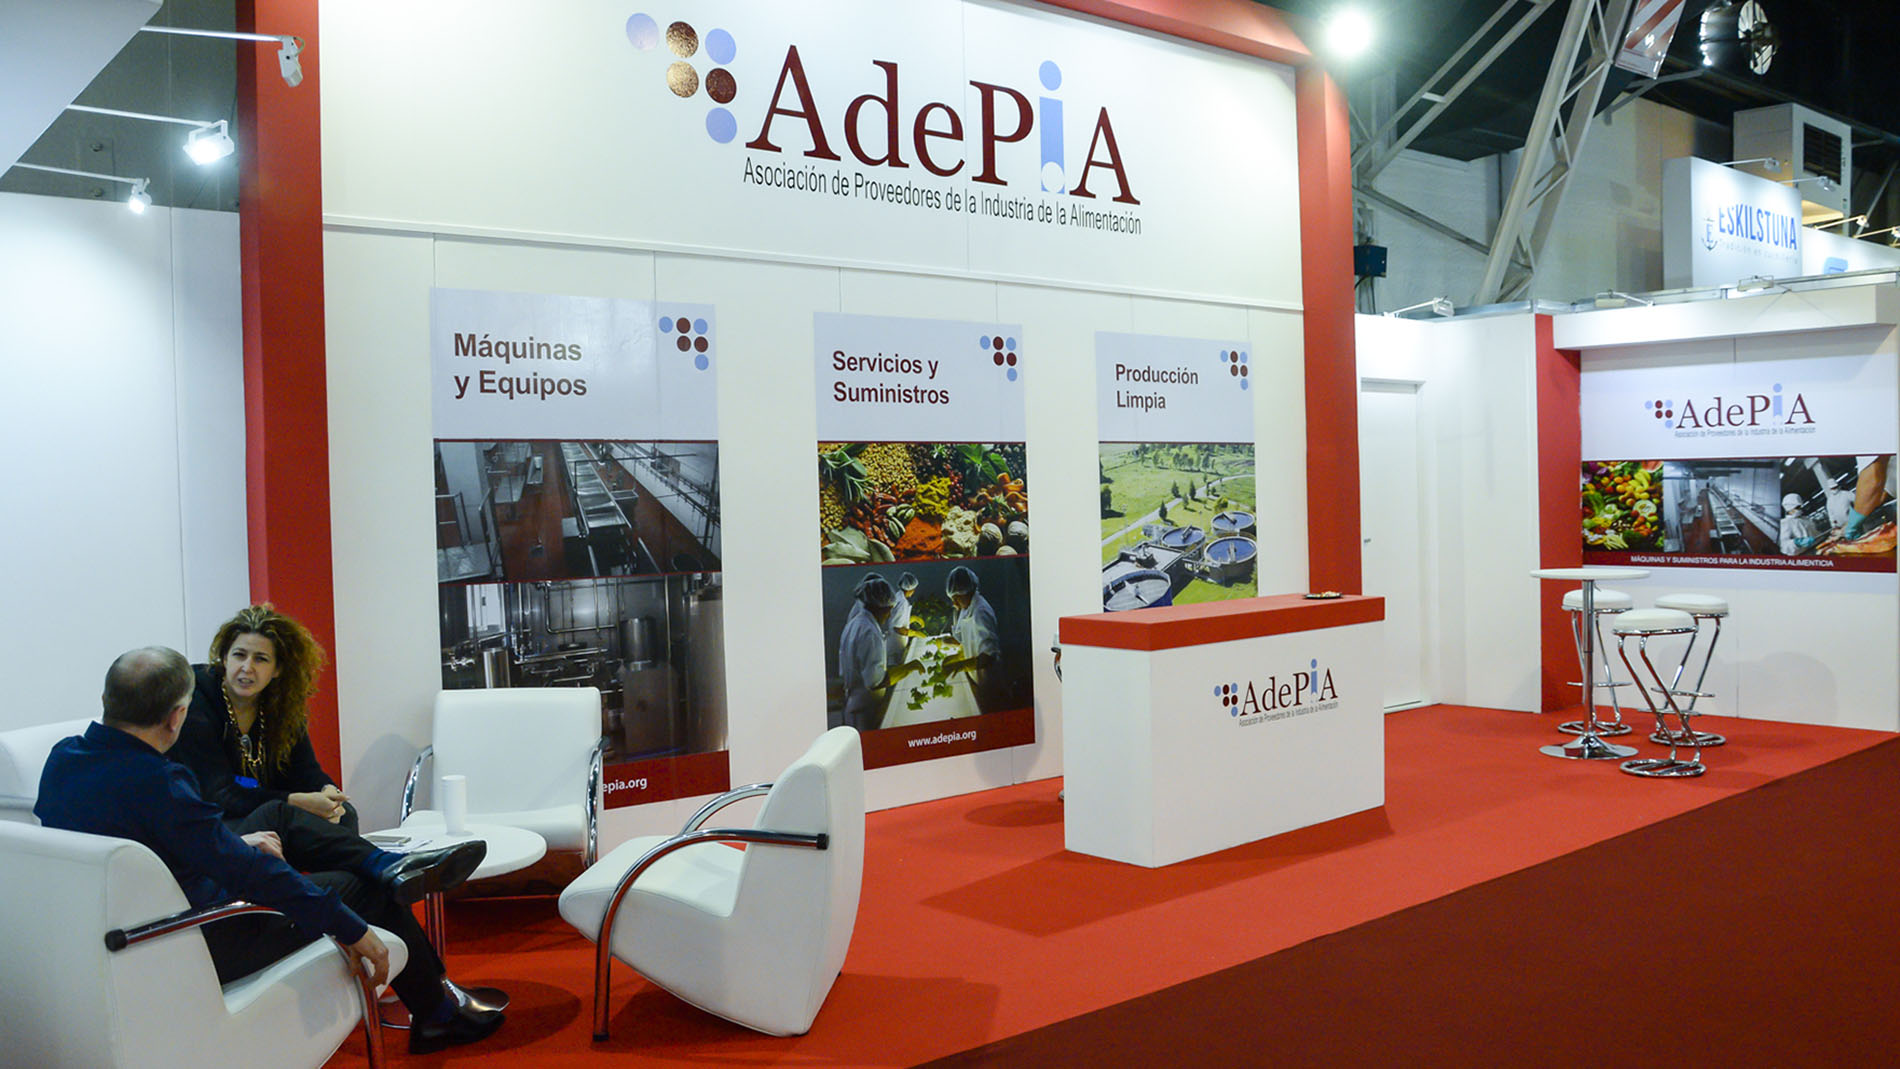 AdePIA - Association of Food Industry Suppliers